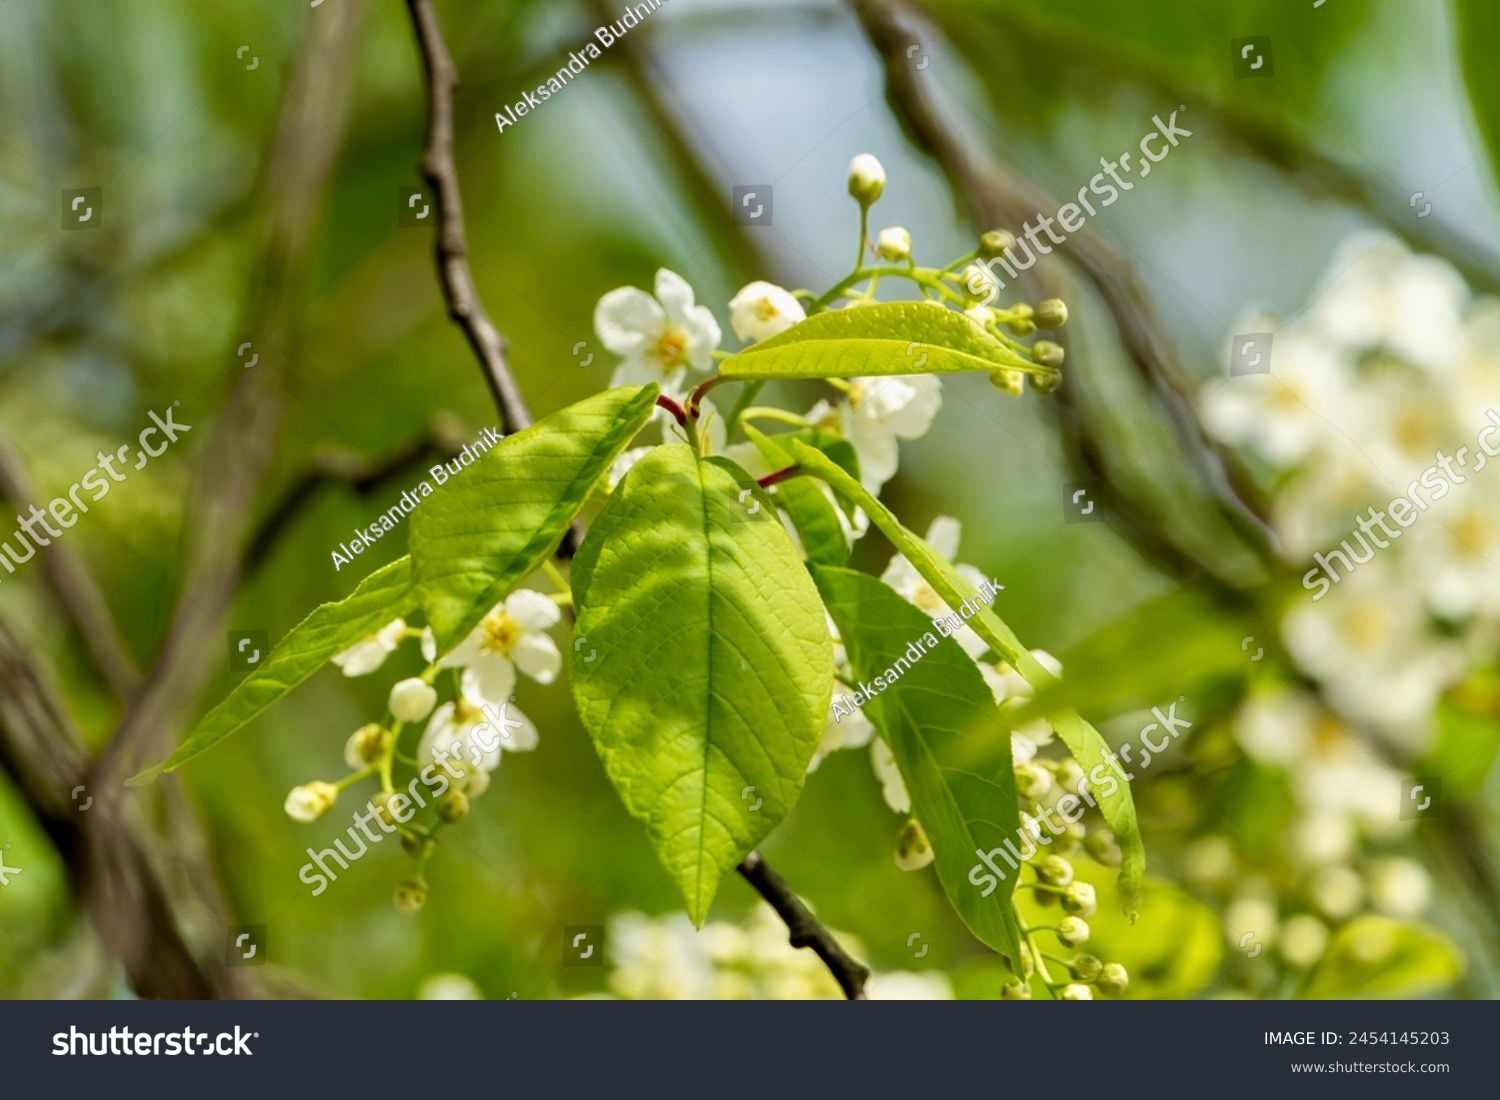 Beautiful green leaves on a tree in the park with delicate white flowers, signs of wind in Europe, lush greenery in the park leafy branches, scenic beauty, flourishing flora, tranquil park setting #2454145203